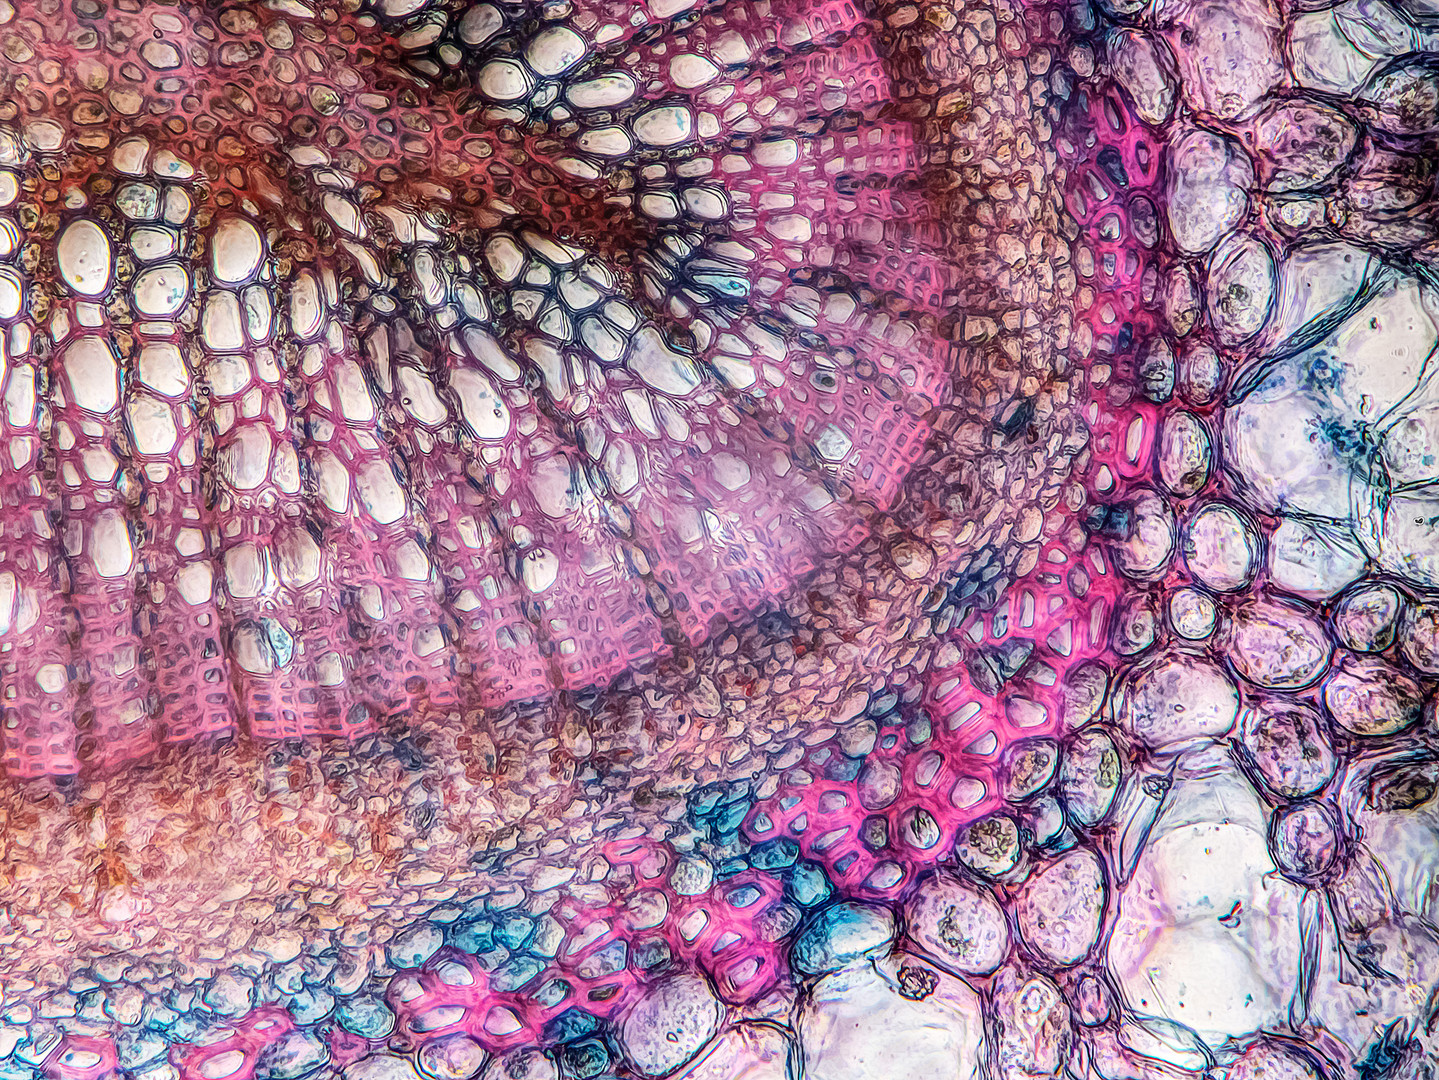 30cb-Cross-section-Ericaceae-with-red-blue-colouring-NikonMPlan40-48B-flash